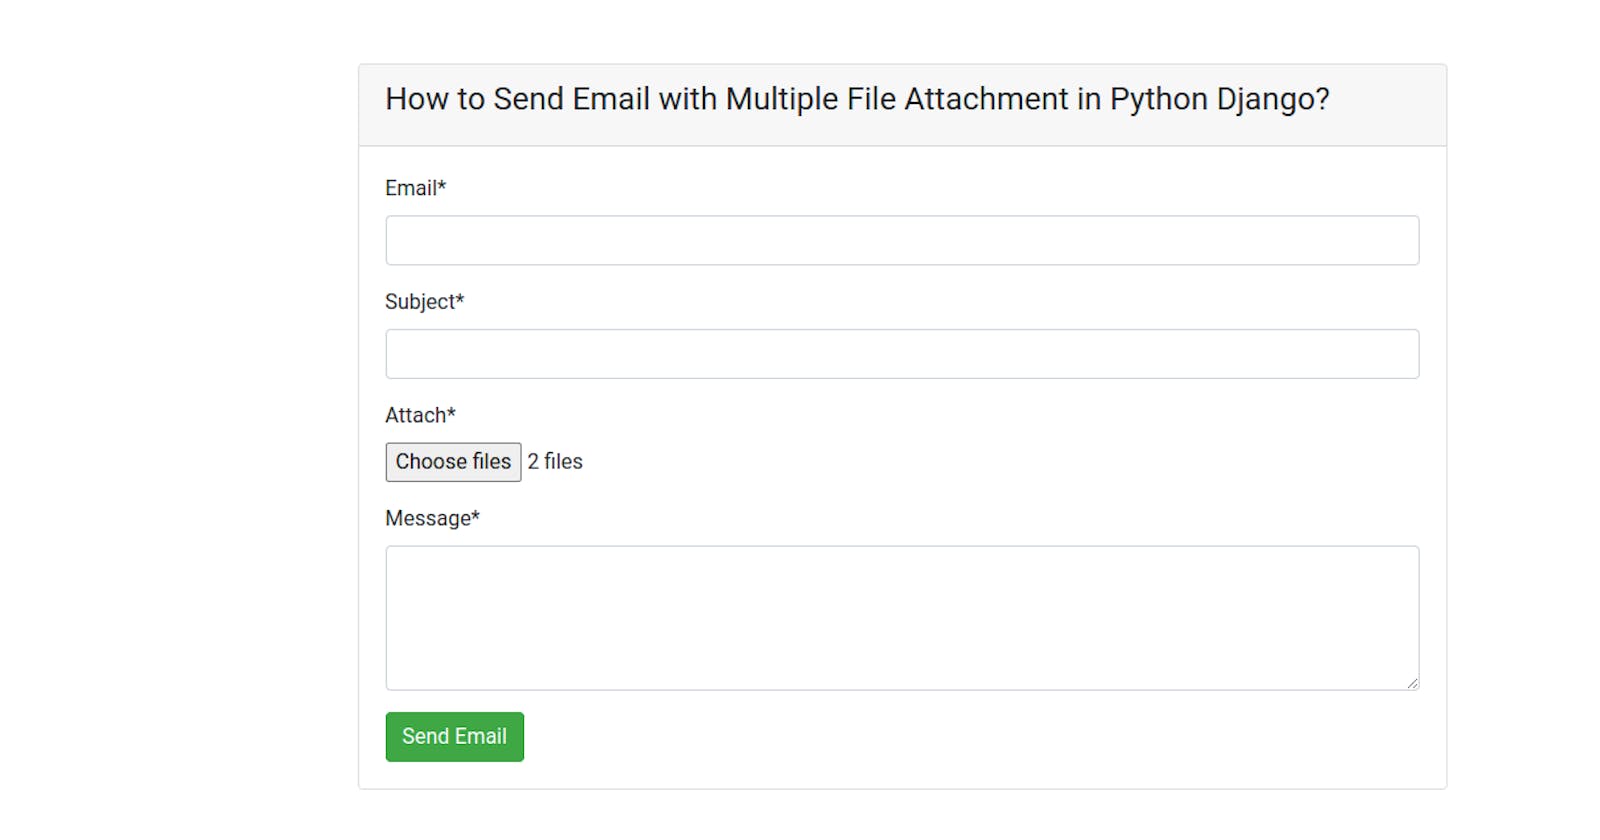 How to Send Email with Multiple File Attachment in Python Django?